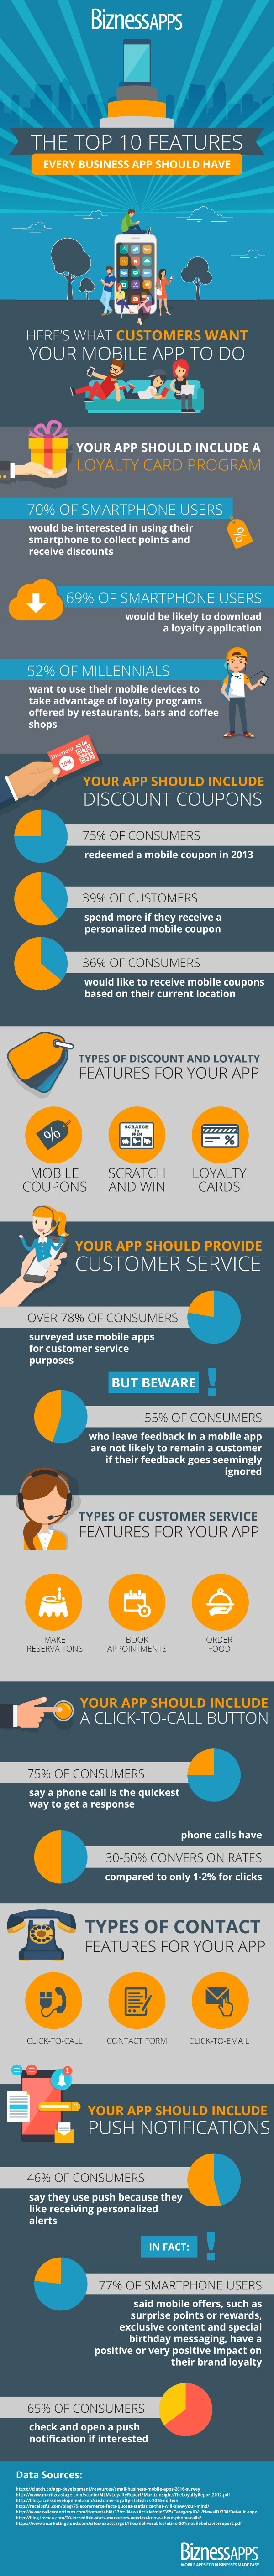 Top 10 Features for Business Mobile Apps [Infographic]